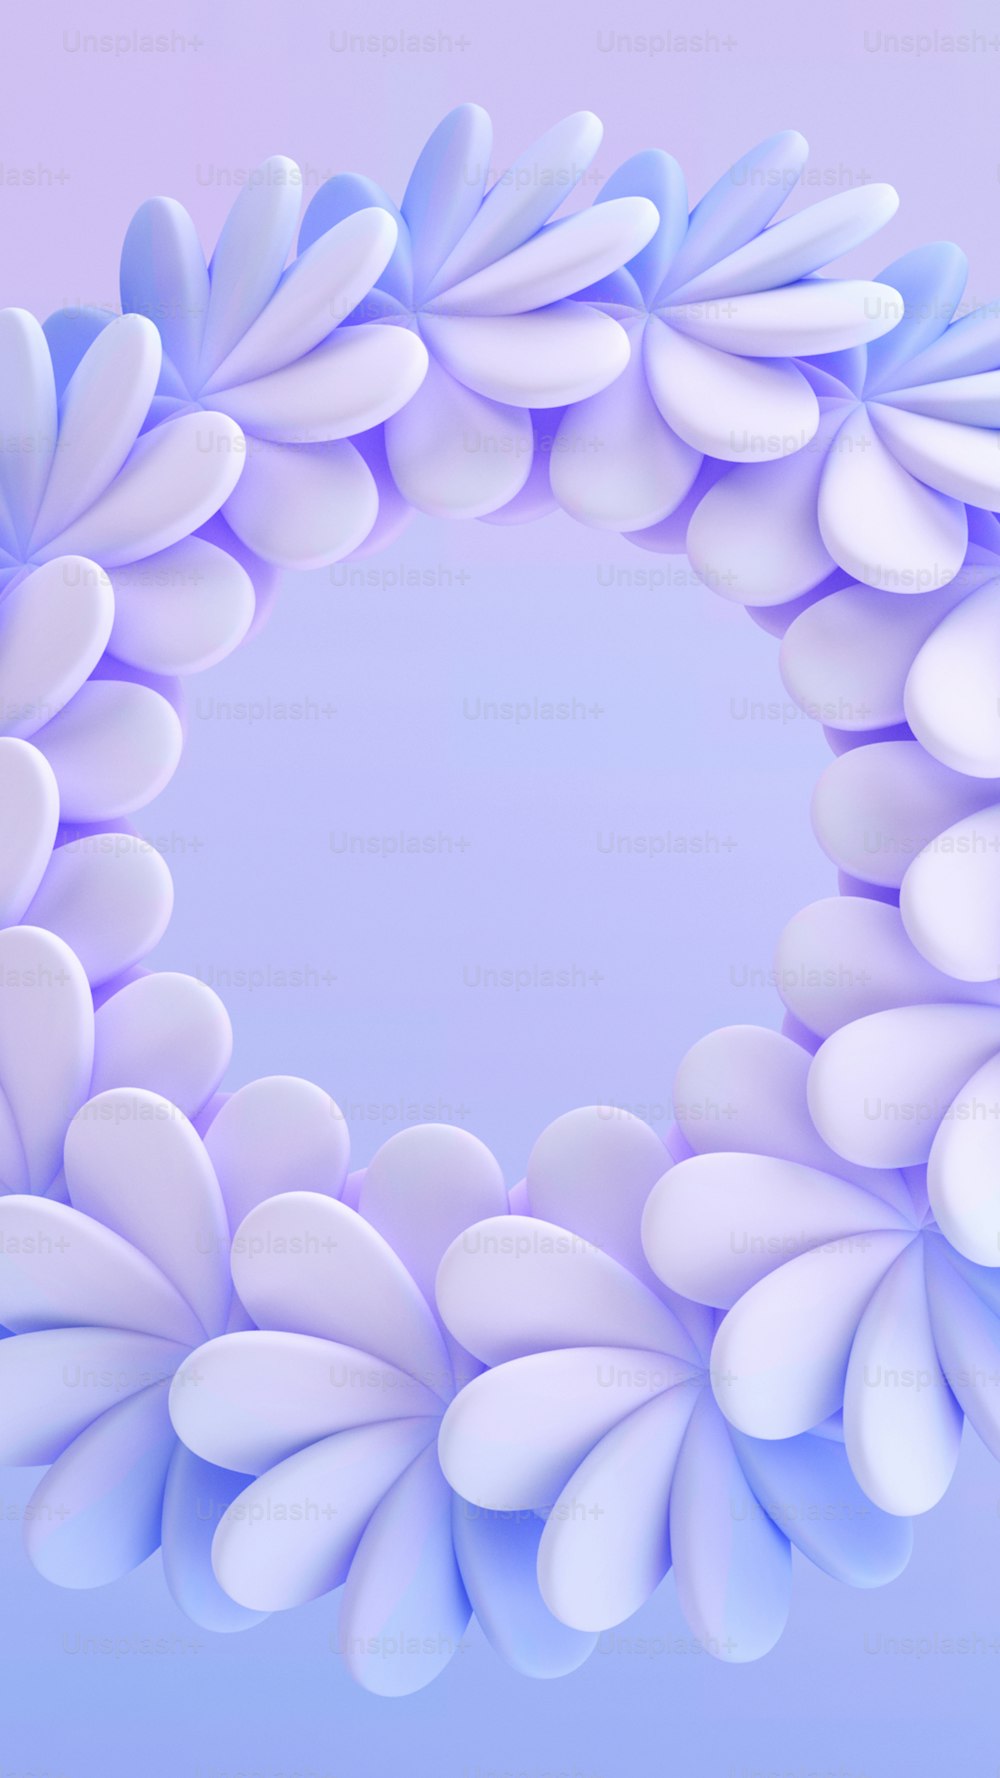 a blue and white circular object with white petals